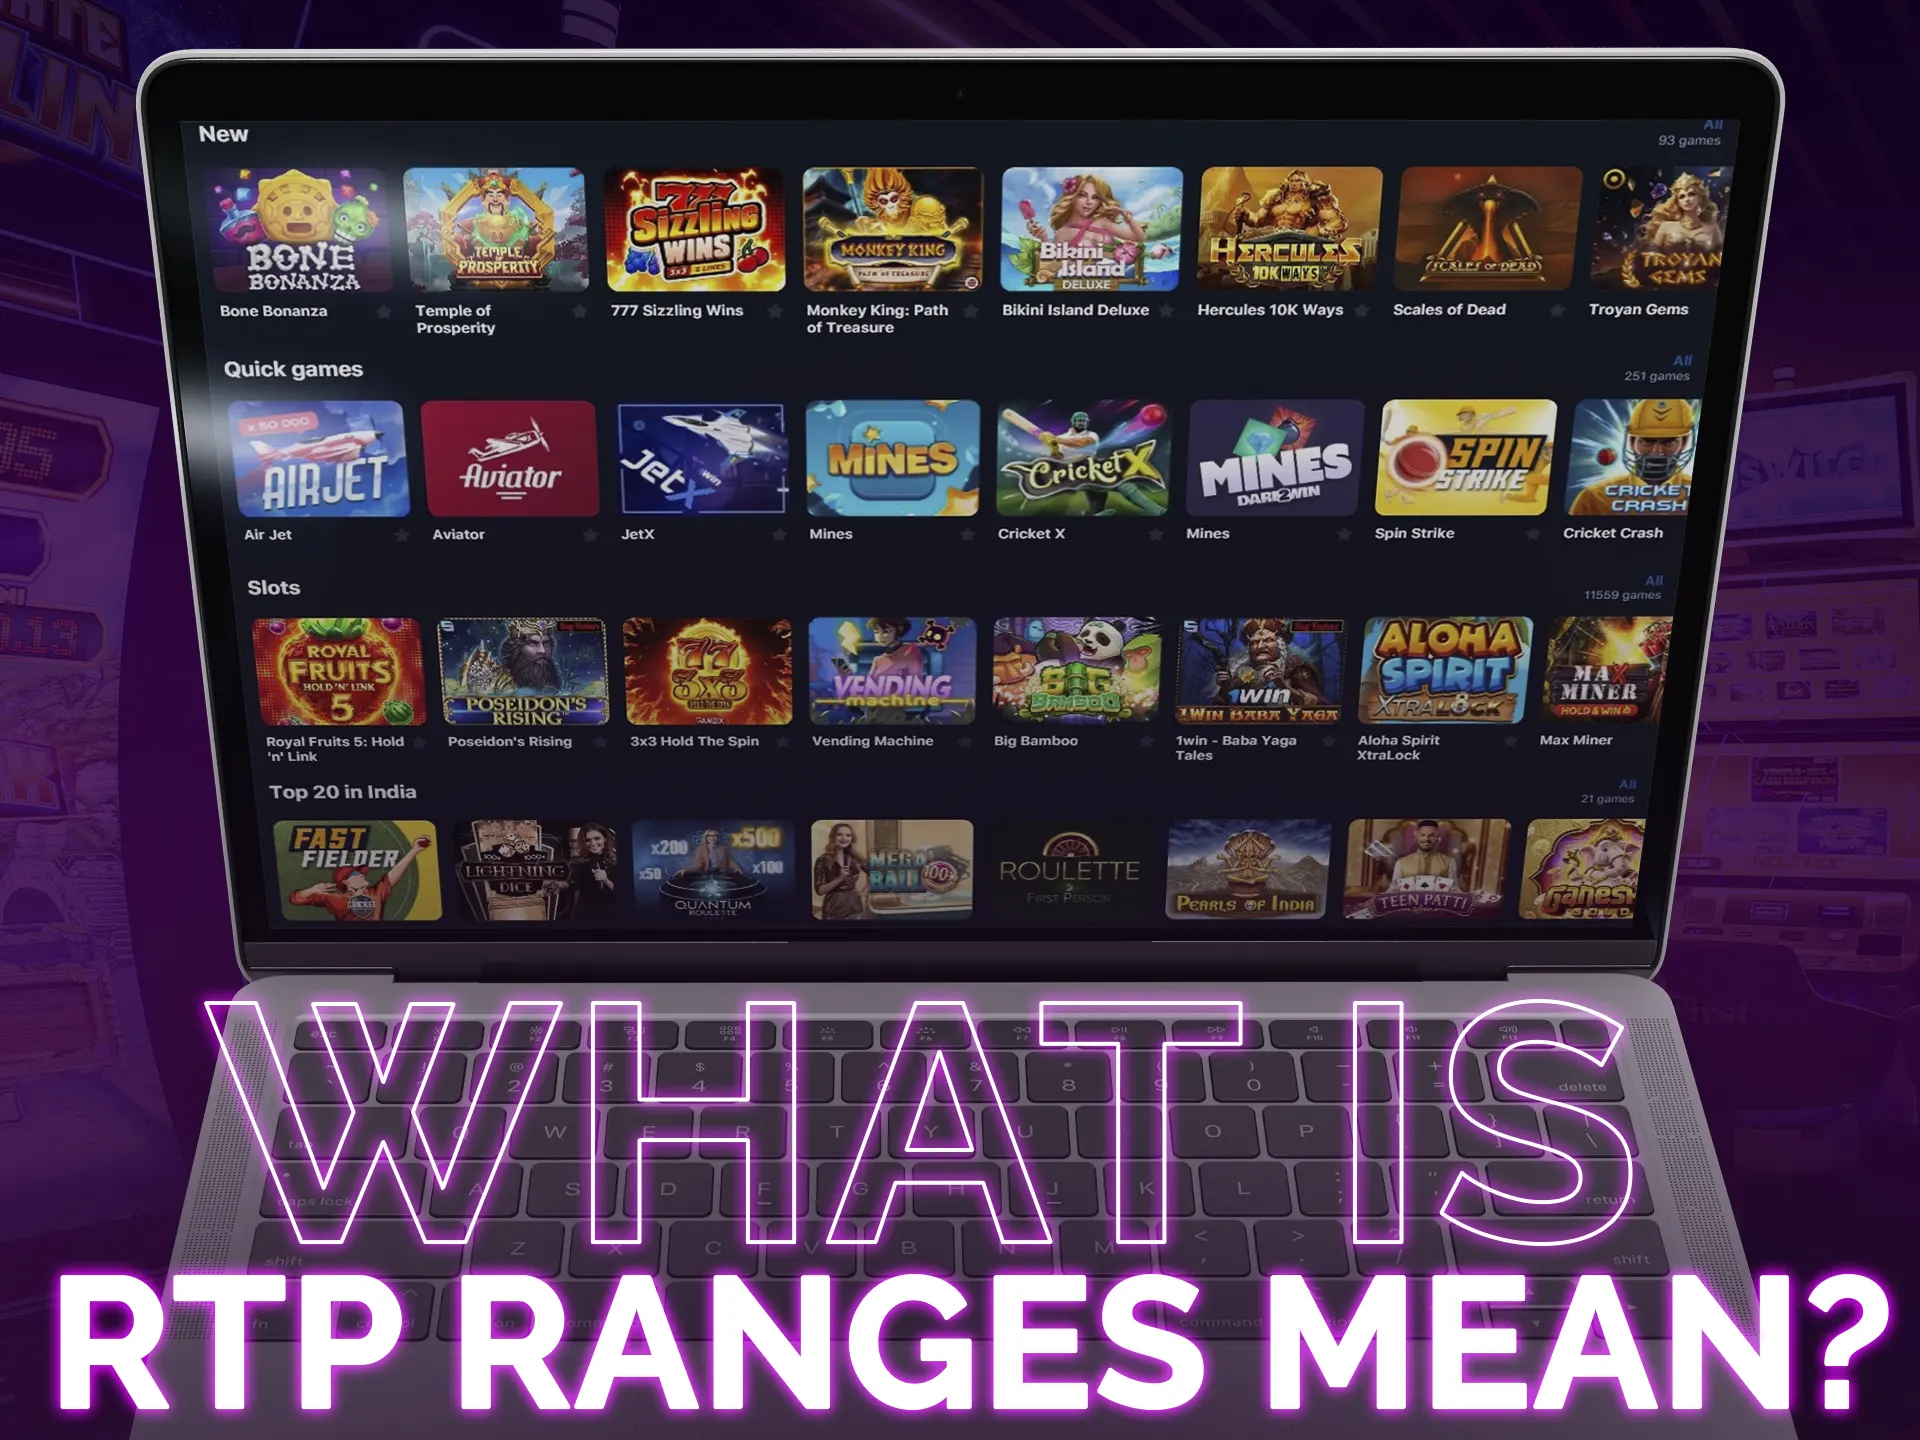 Slot RTP may vary based on game modes or casino versions.